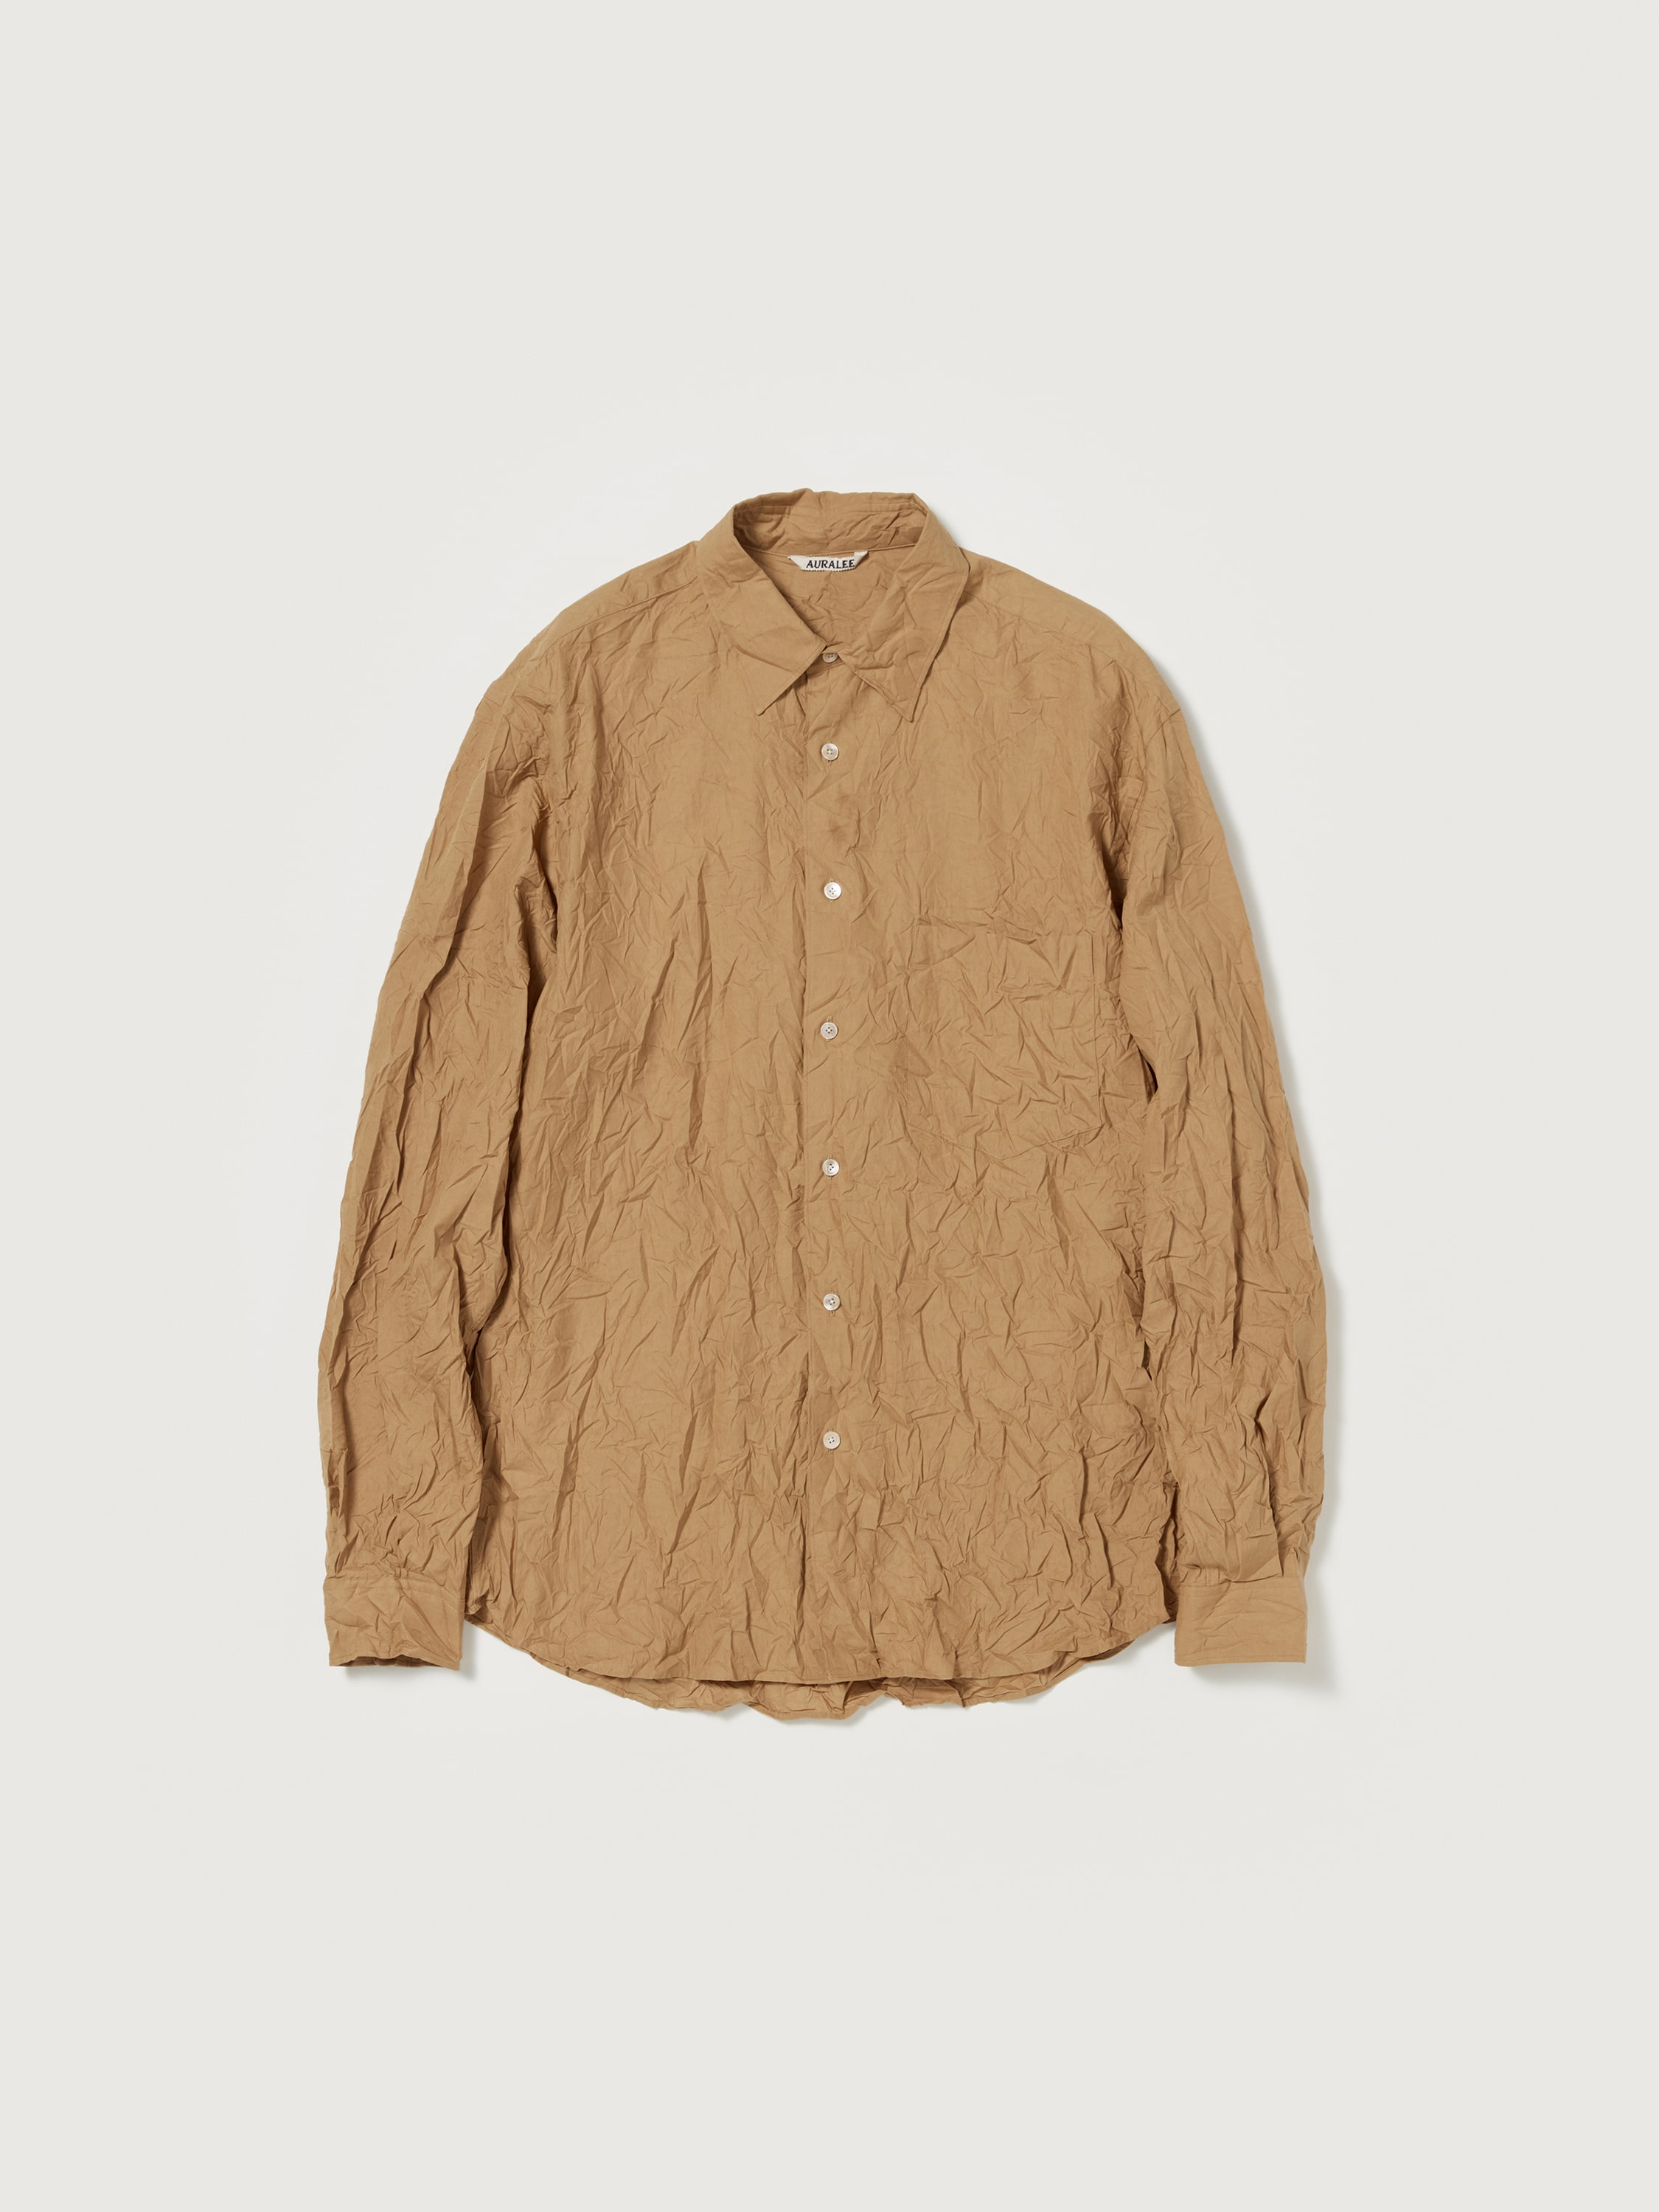 WRINKLED WASHED FINX TWILL SHIRT 詳細画像 BROWN 1